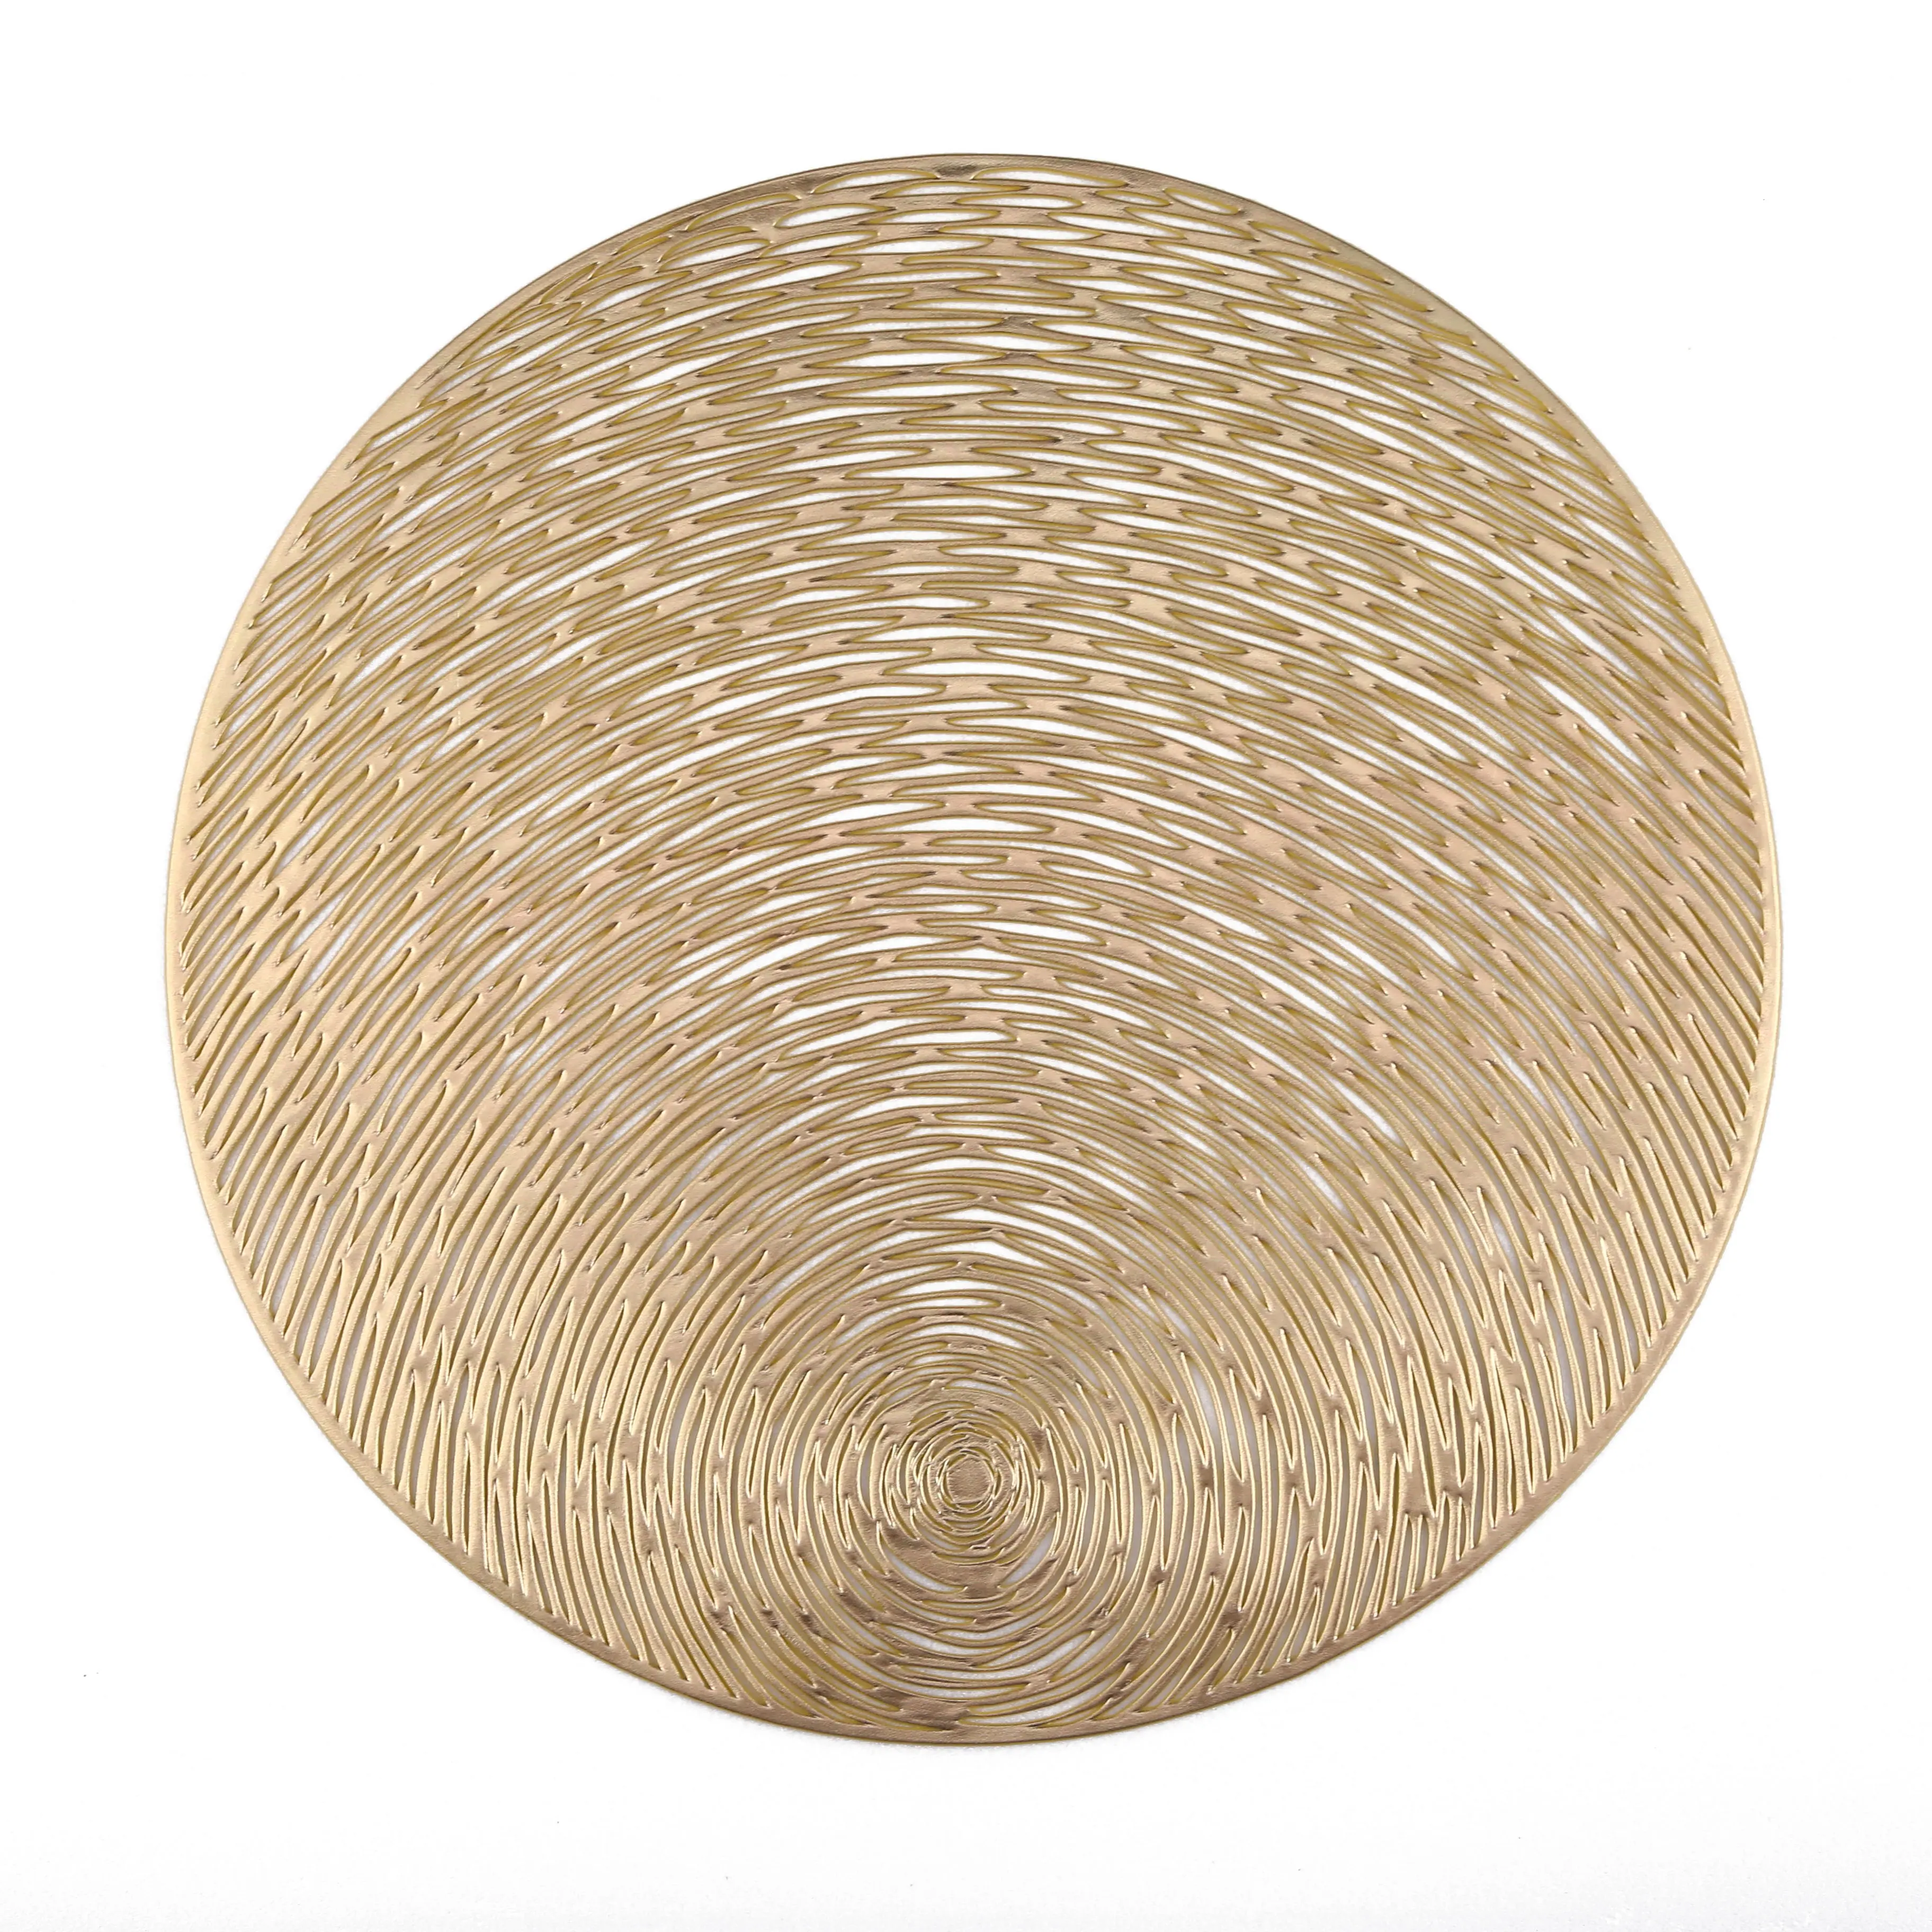 IN STOCK Gold PVC Eco-Friendly Stocked Round Shaped Placemat For Decoration